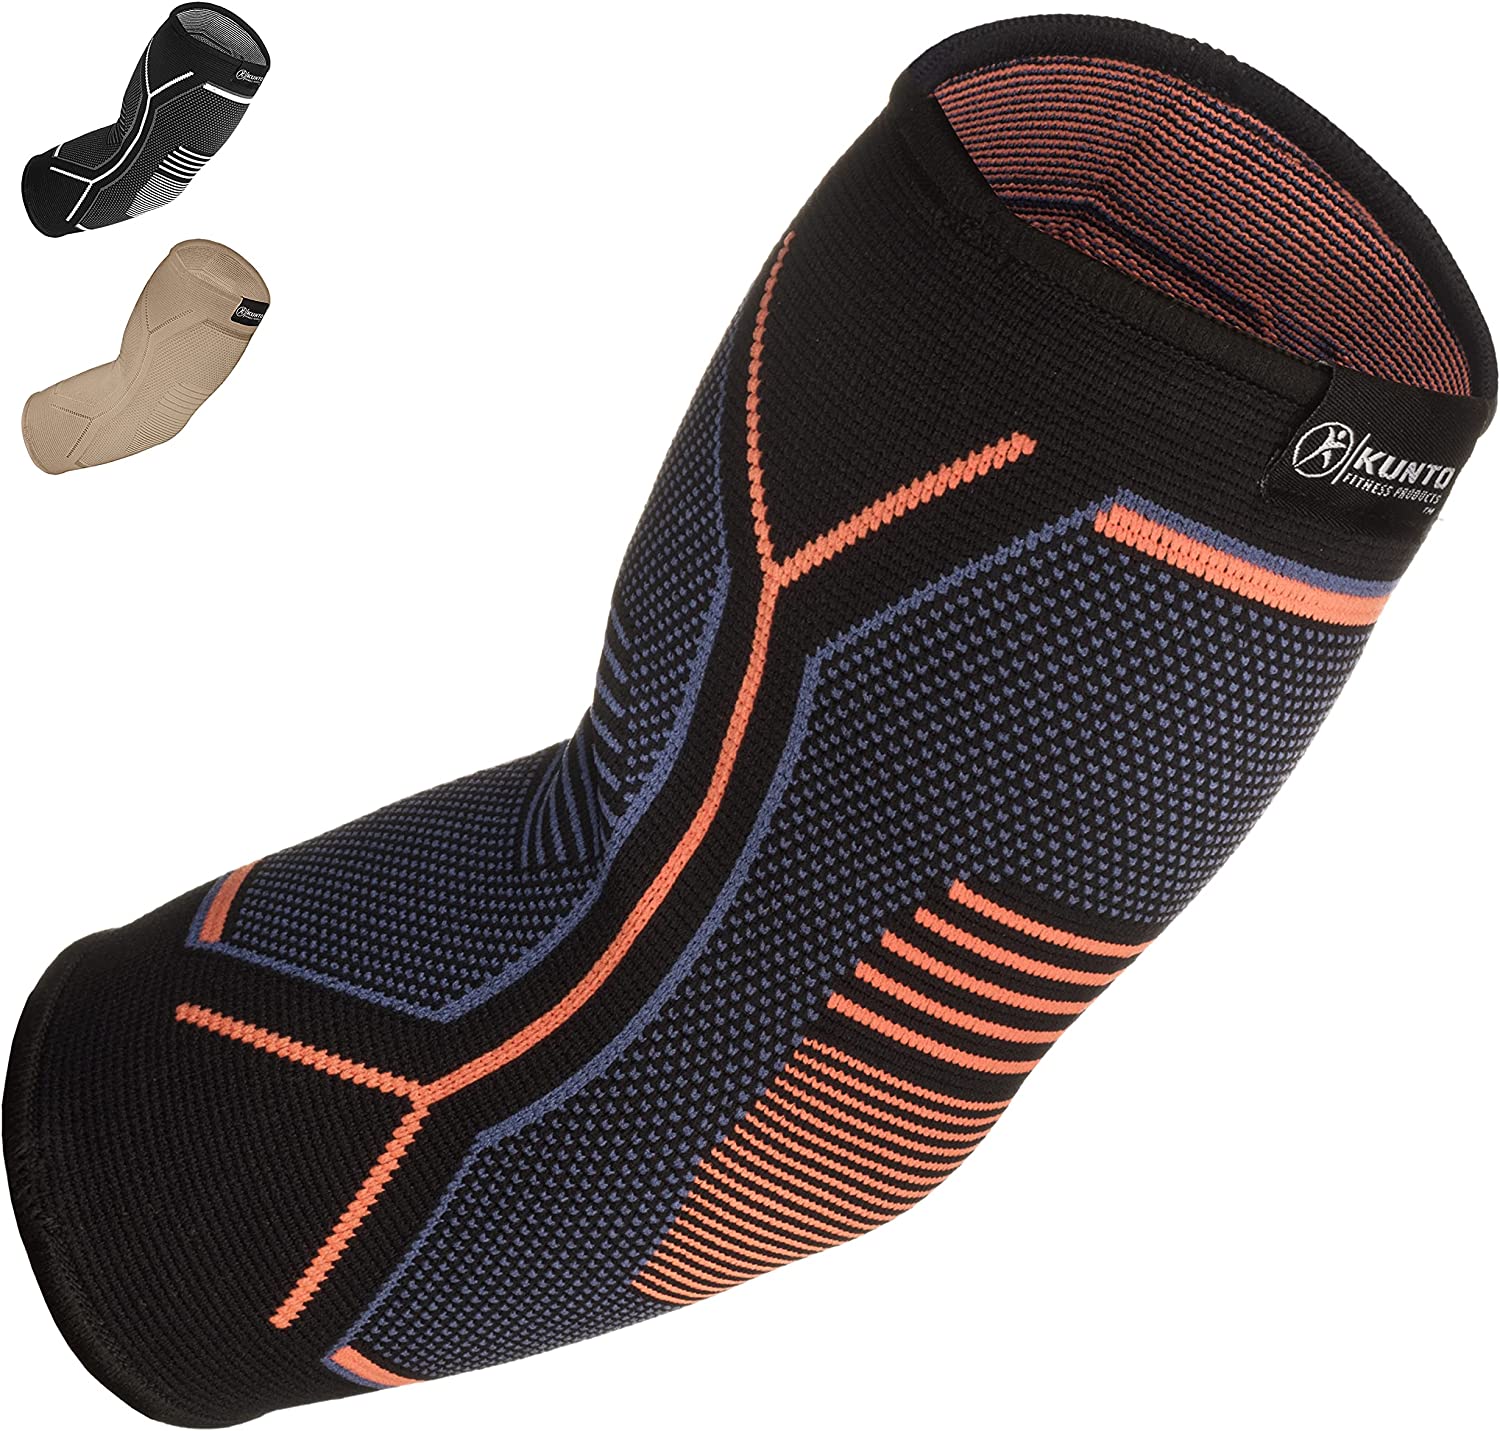 Kunto Fitness Elbow Brace Compression Support Sleeve